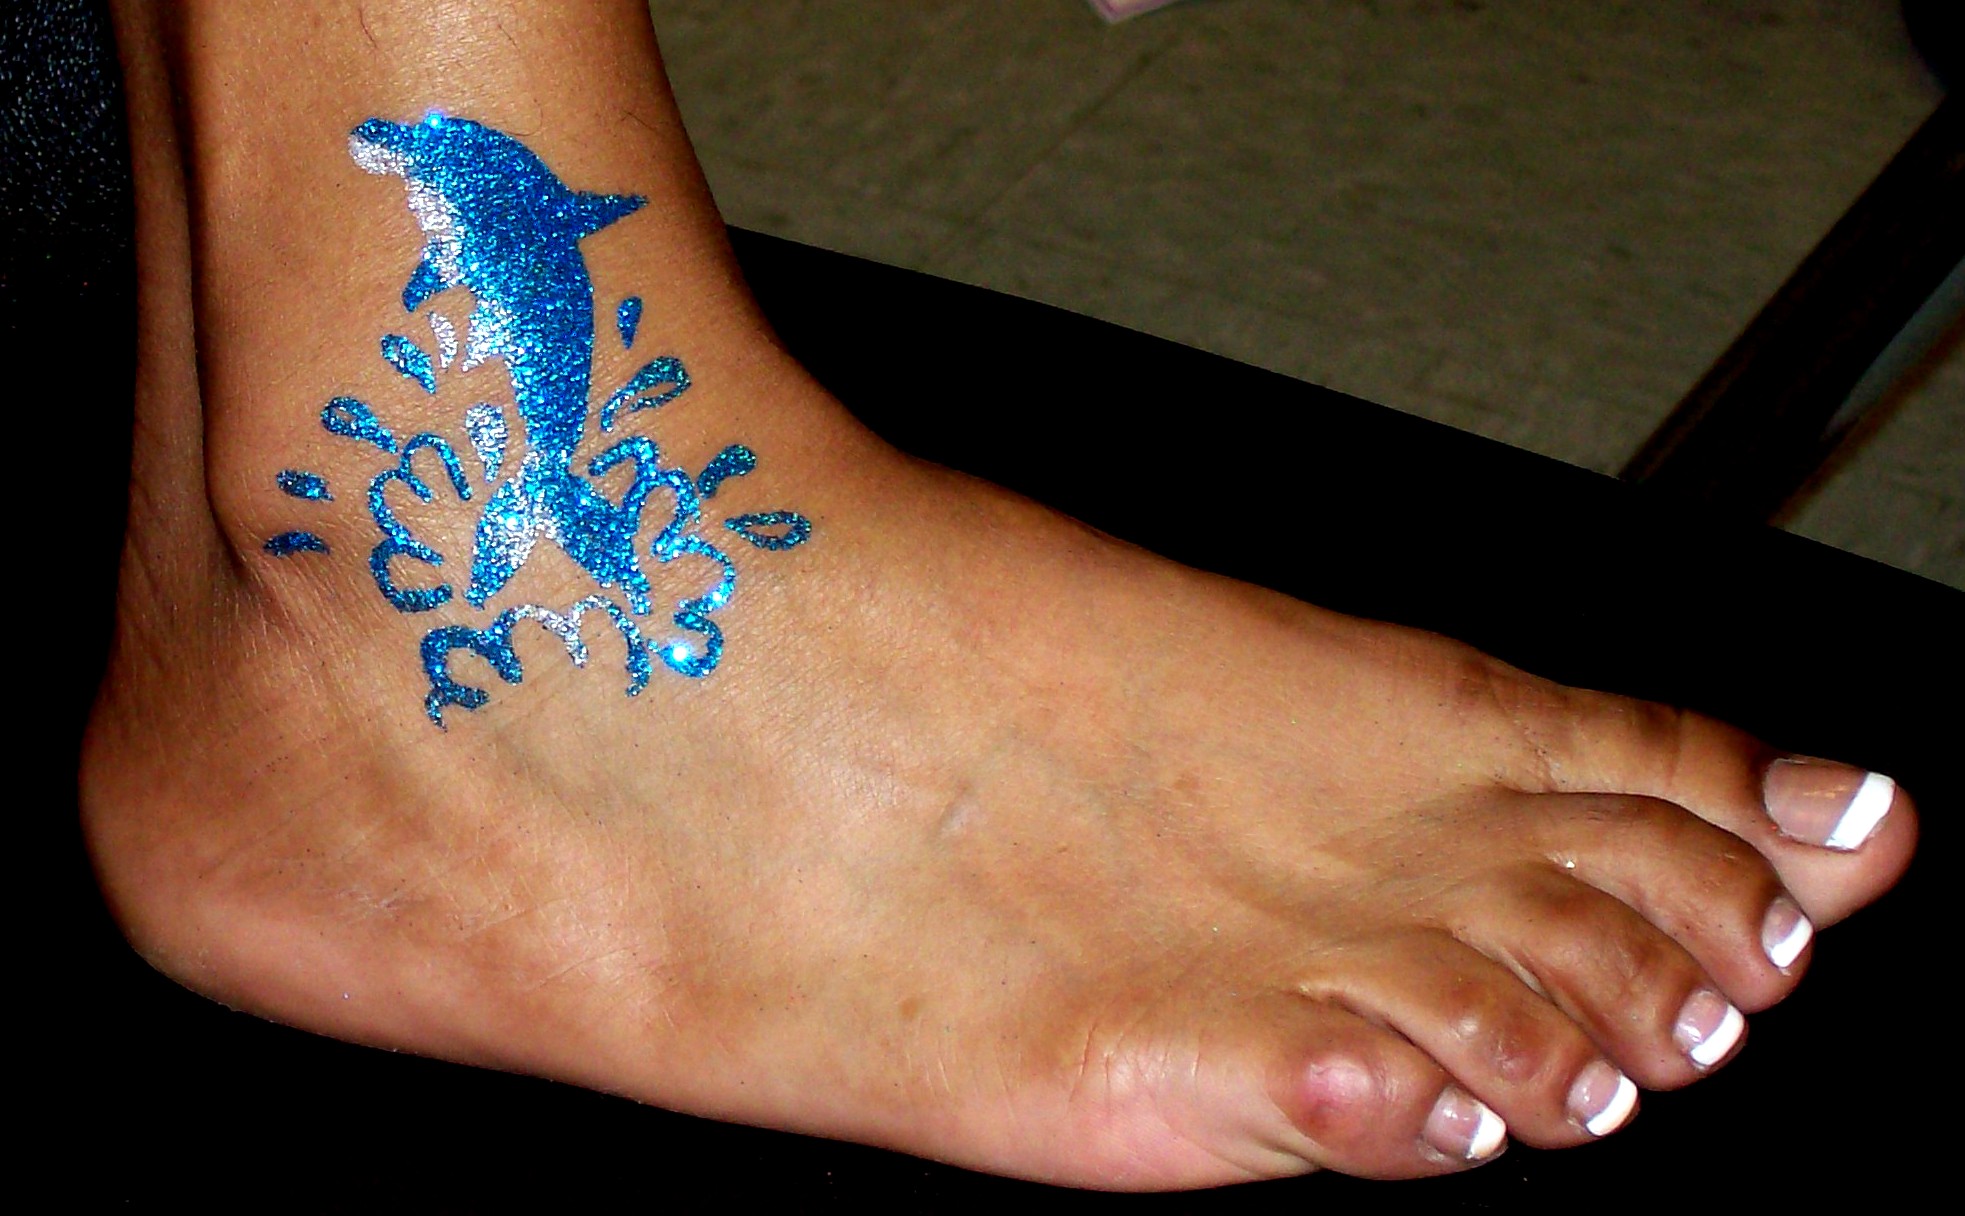 Dolphin tattoo design on ankle for women 2015